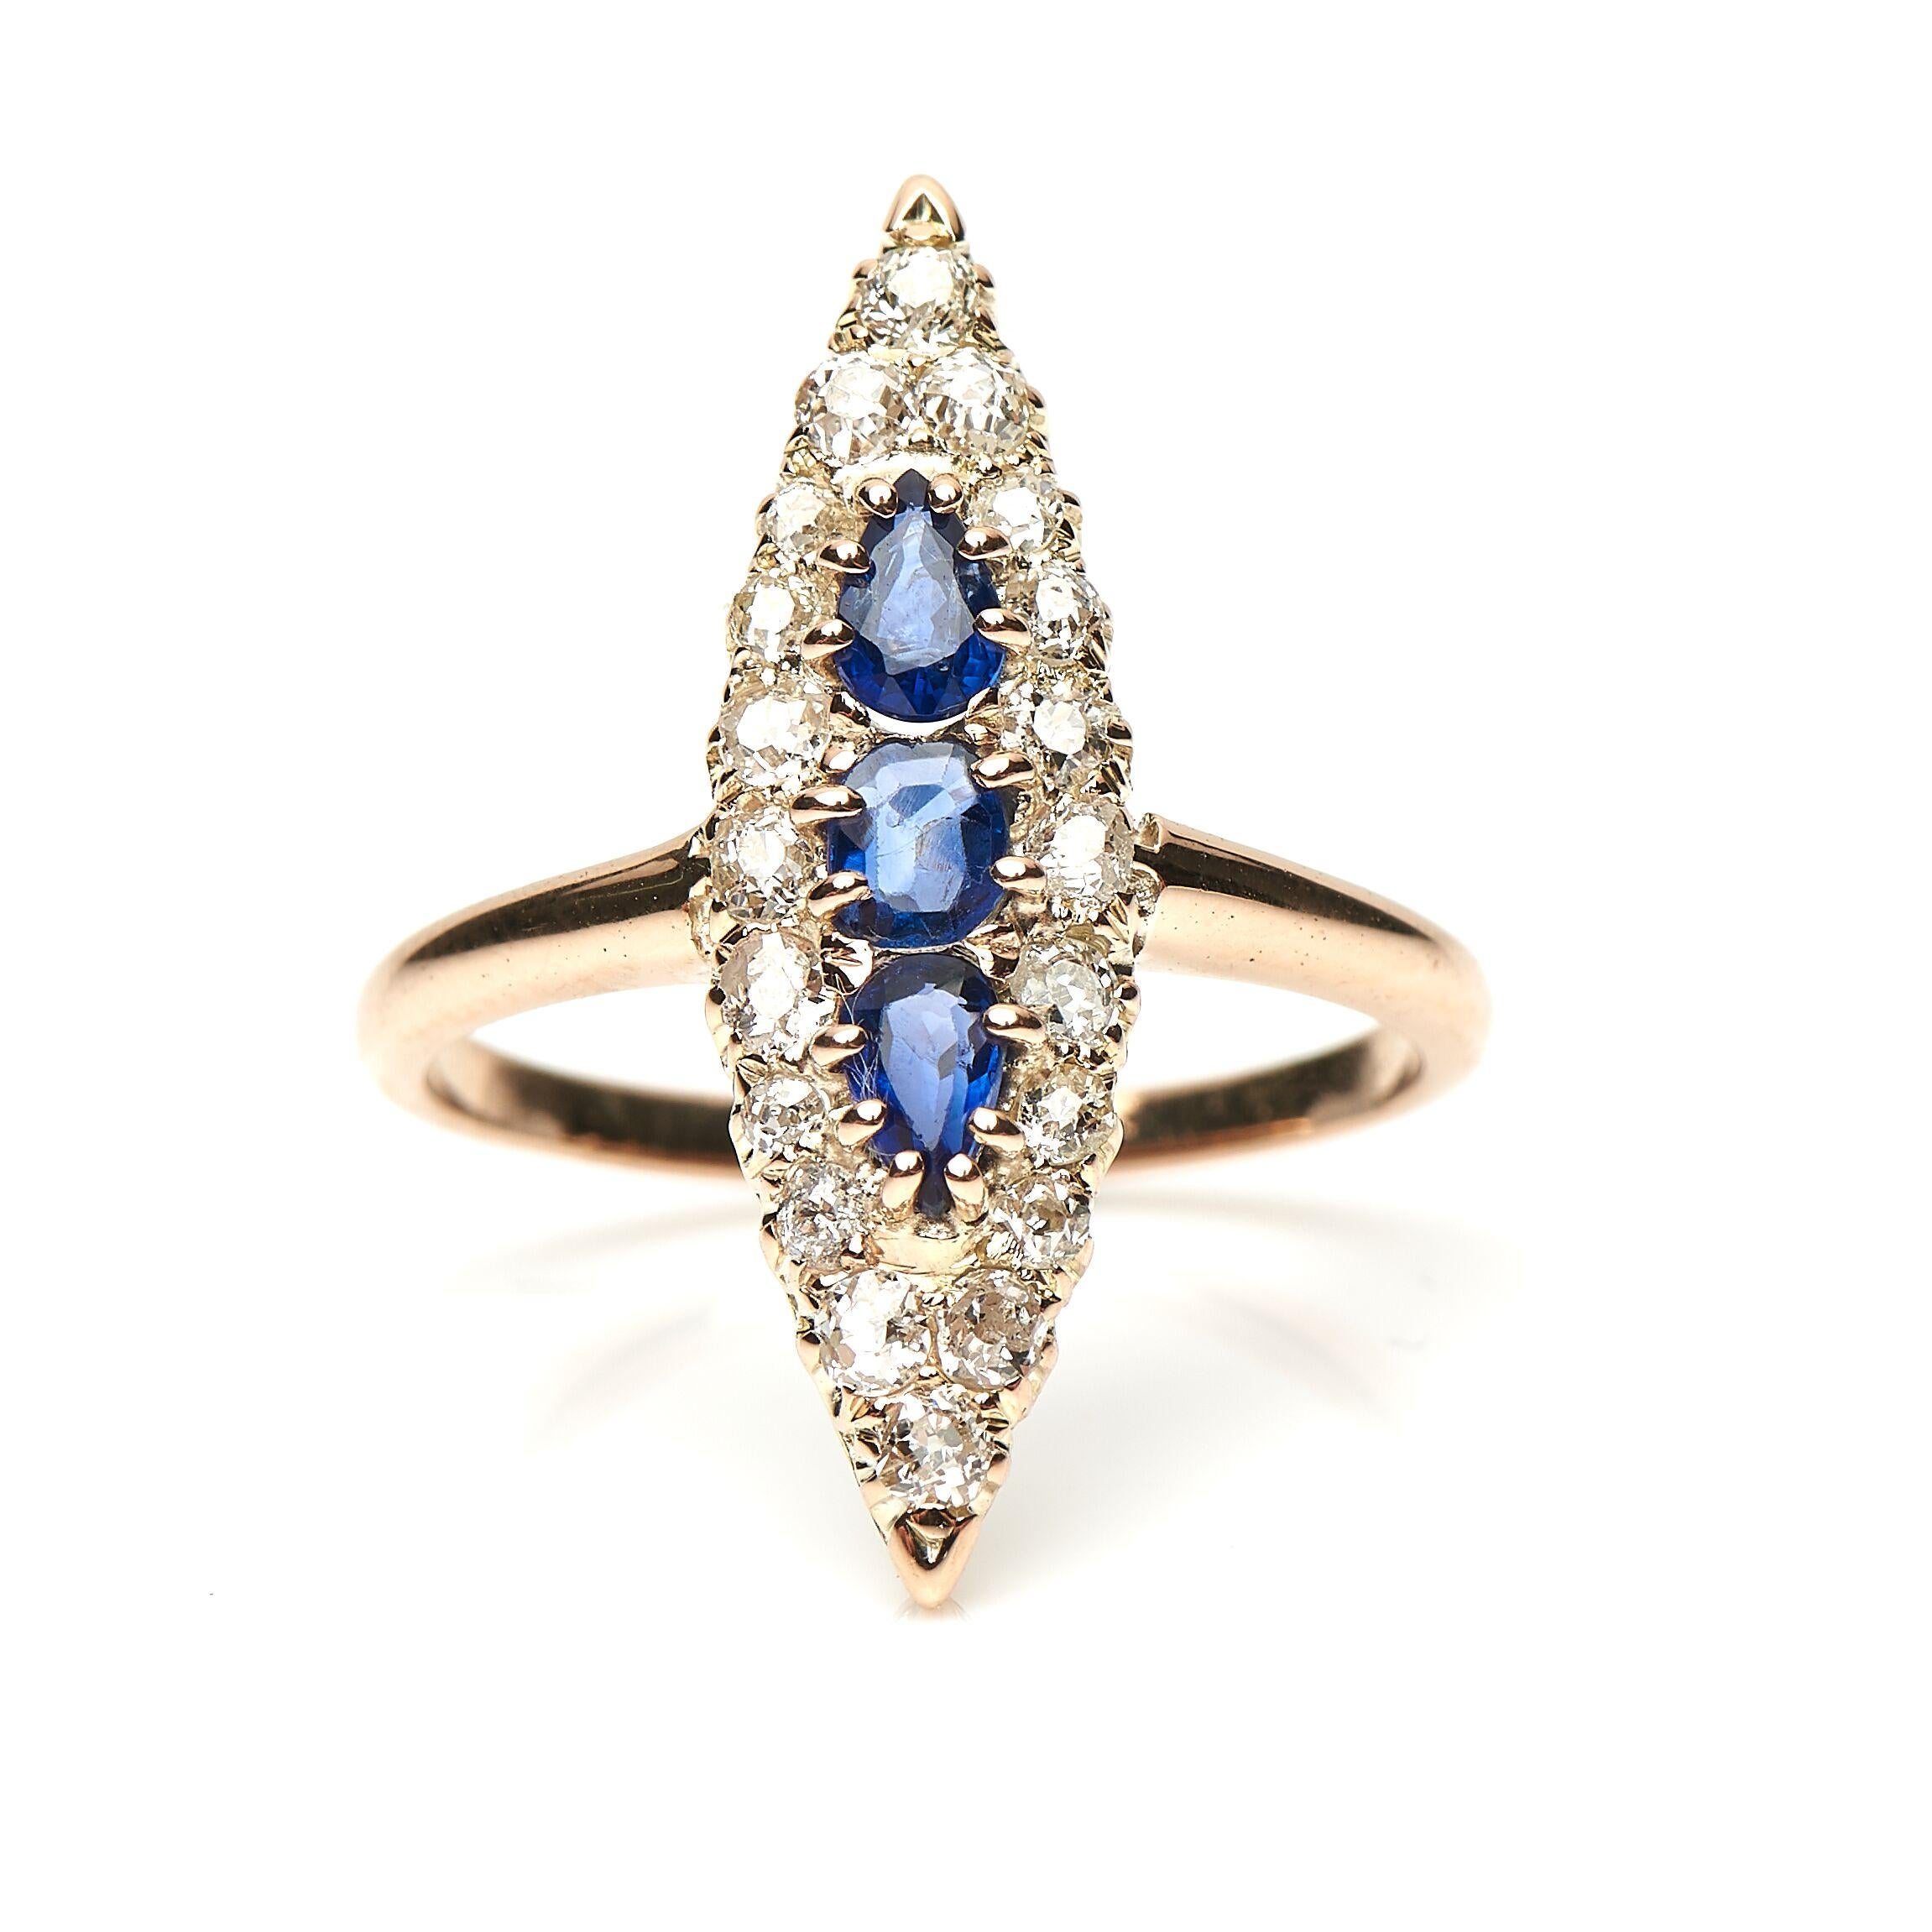 Victorian, sapphire and diamond navette shape ring, circa 1890. Set to centre an oval sapphire with two further vertically set pear-cut sapphires with a boarder of old cut diamonds. The sapphires are a wonderful mid-blue hue and the diamonds are